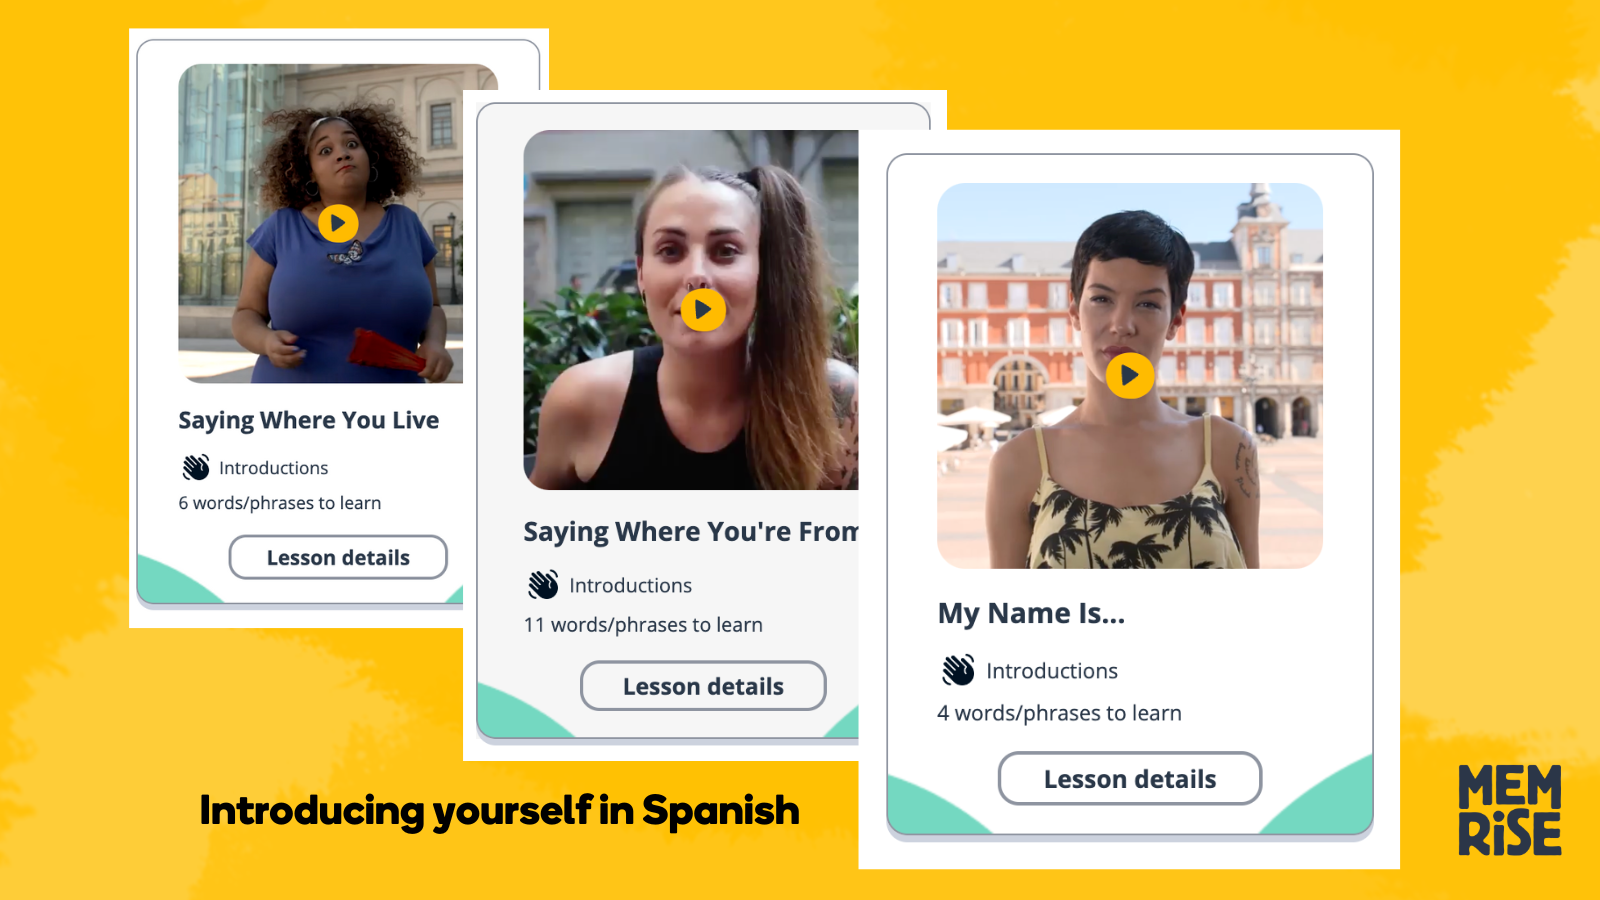 Three examples of lessons to introduce yourself in Spanish with Memrise videos of native speakers